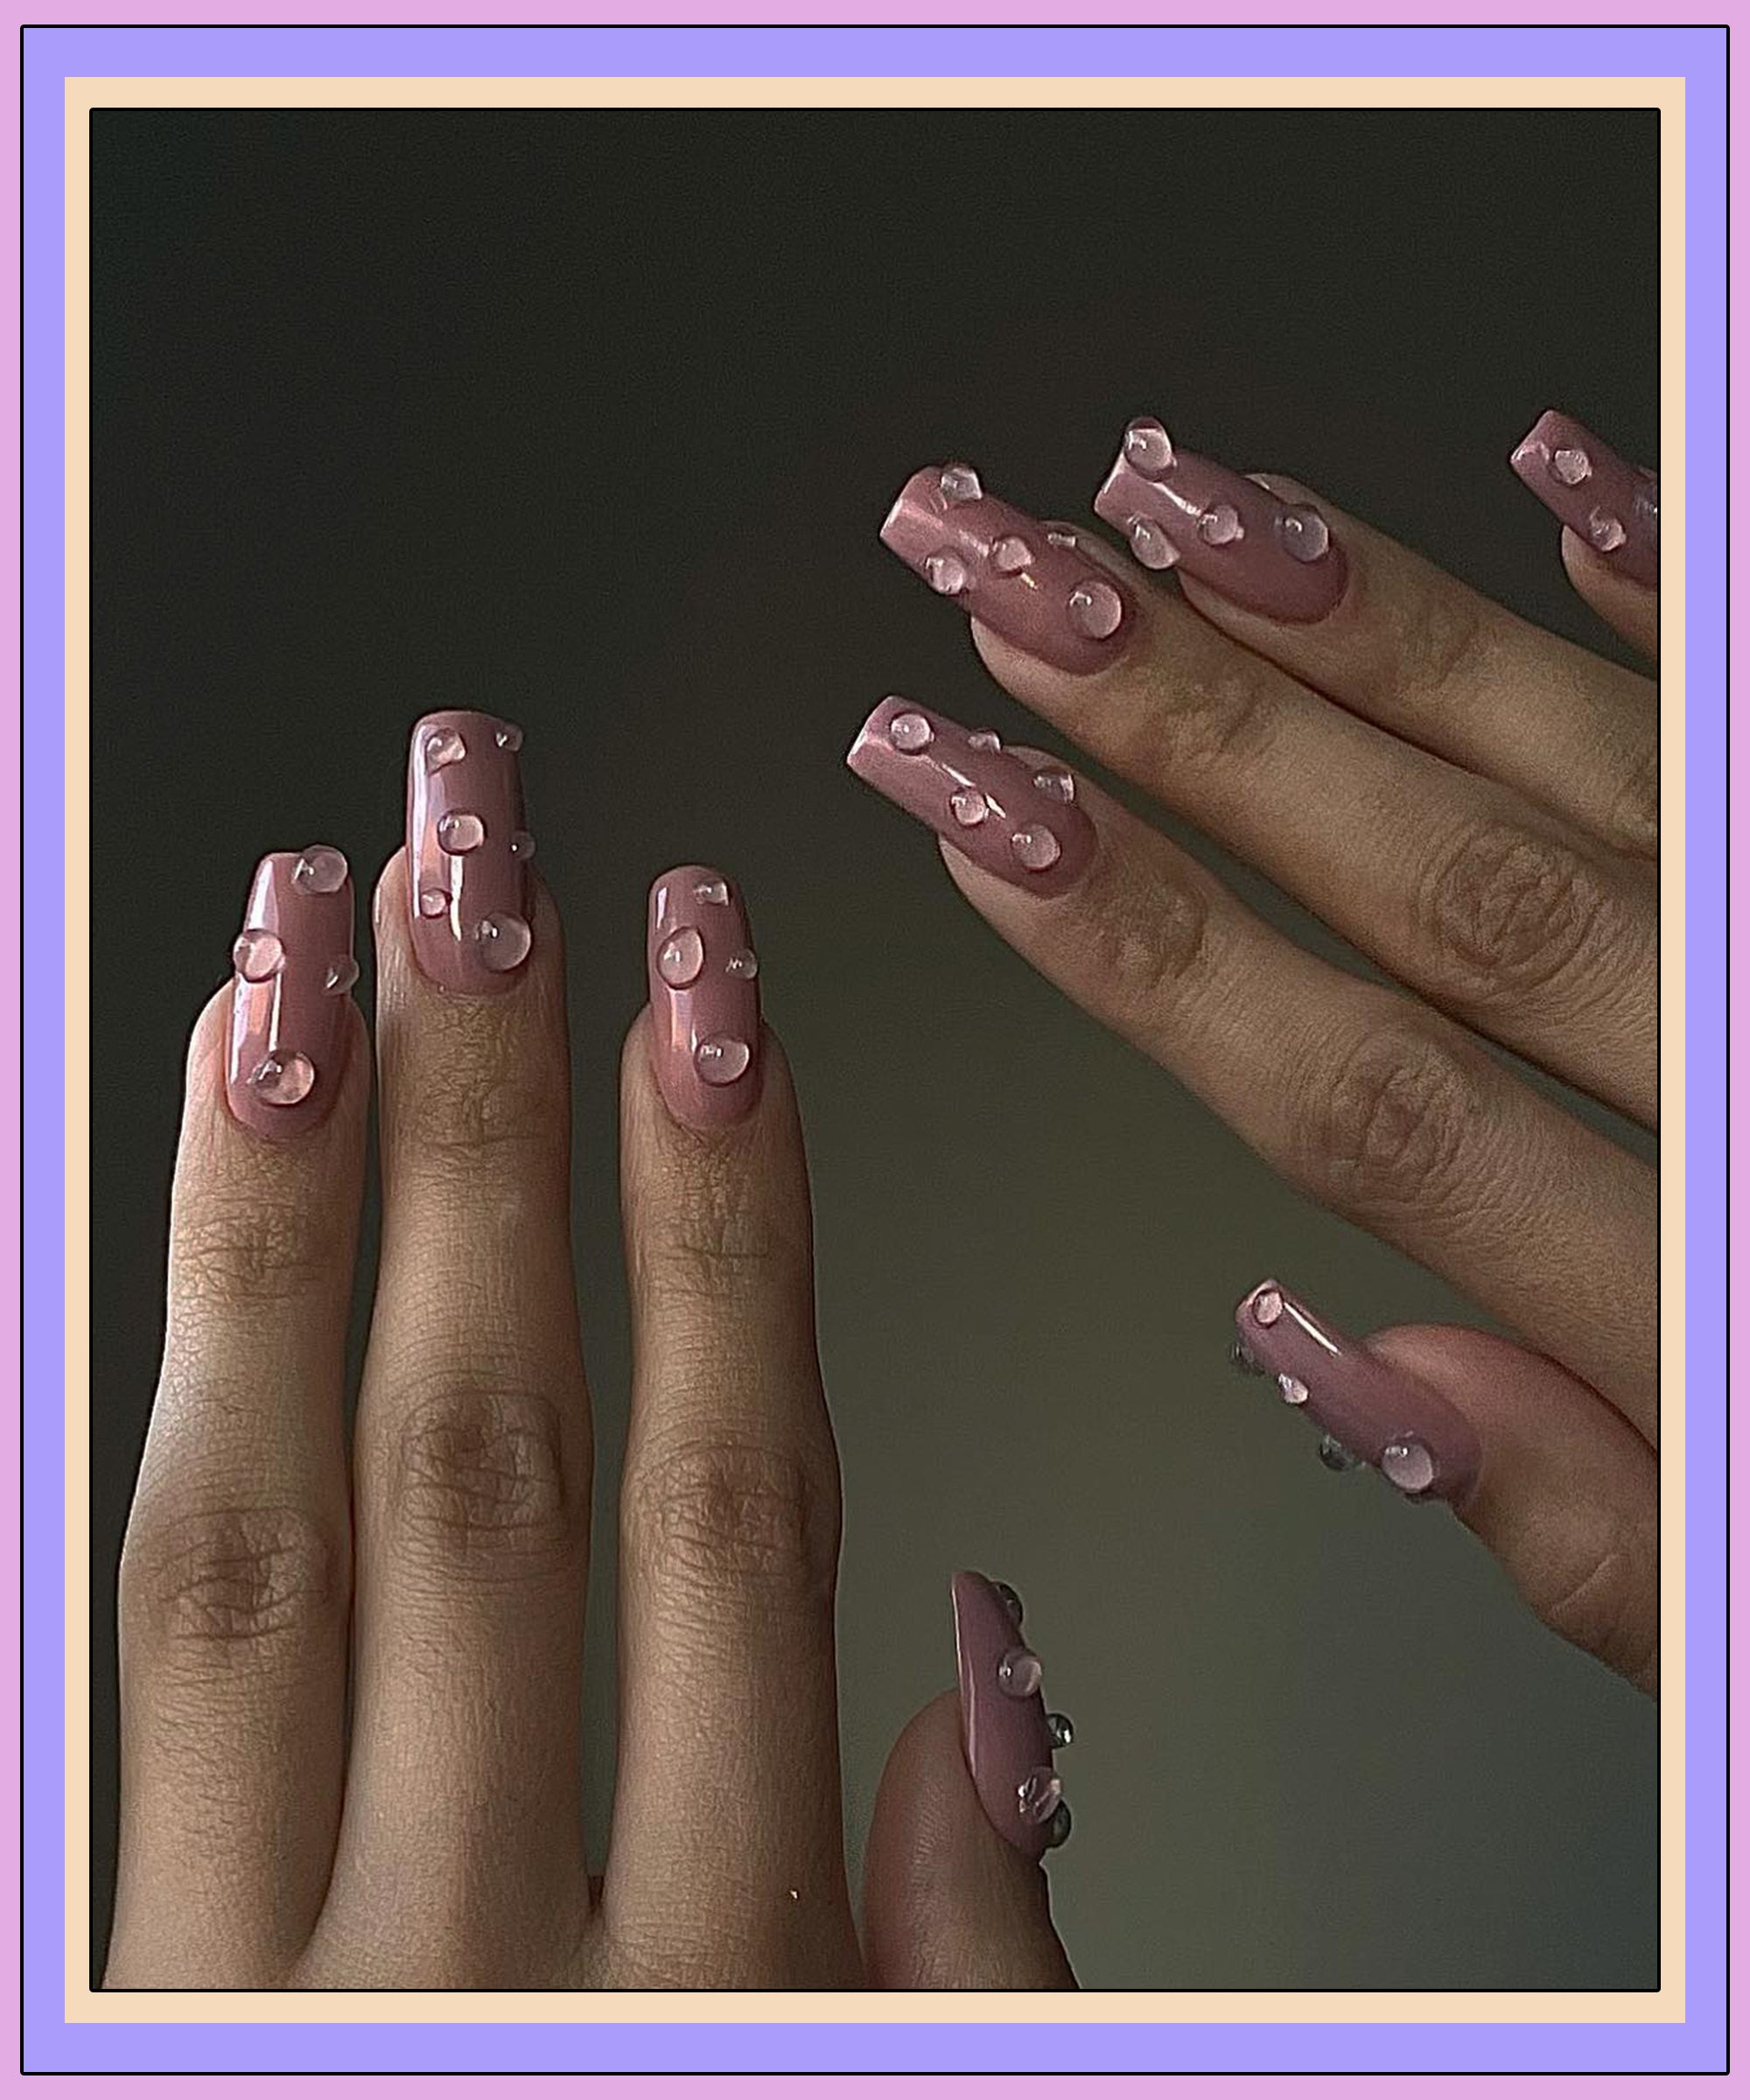 6 Pearl Nail Ideas To Upgrade Your Spring Manicure Game